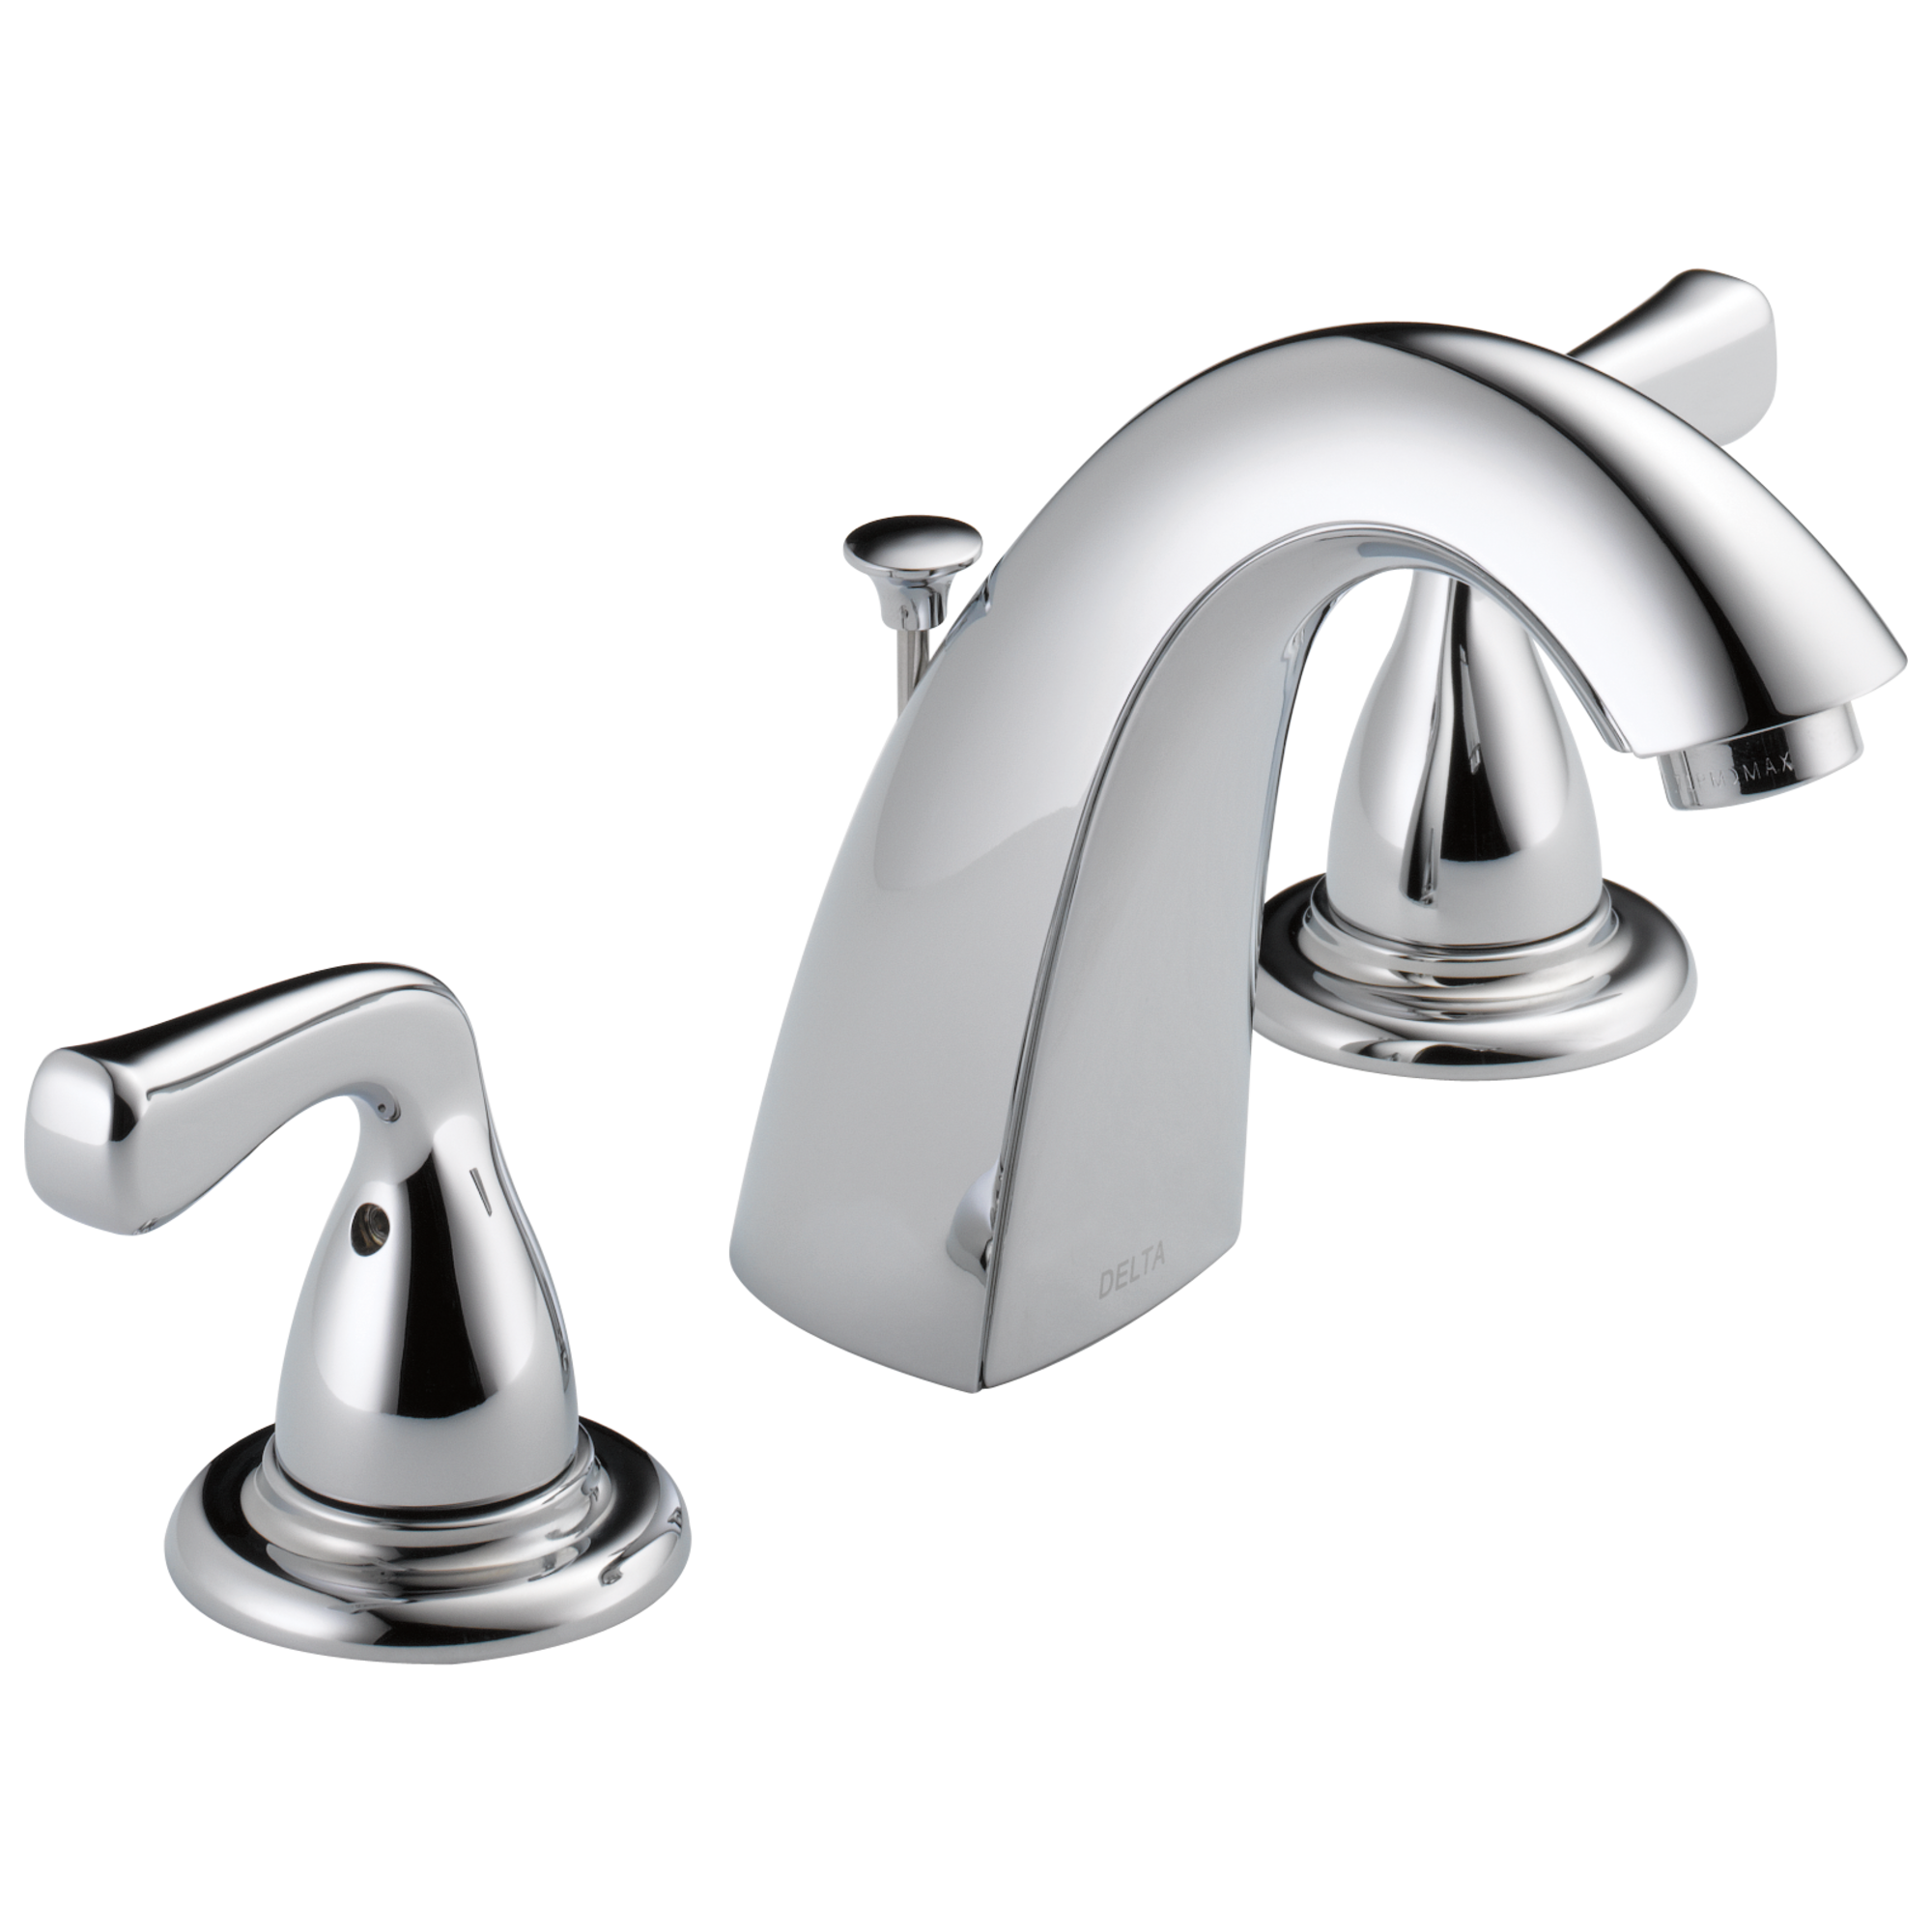 Delta Foundations 2 Handle Widespread Lavatory Faucet Chrome B3511lf Incomplete for sale online 